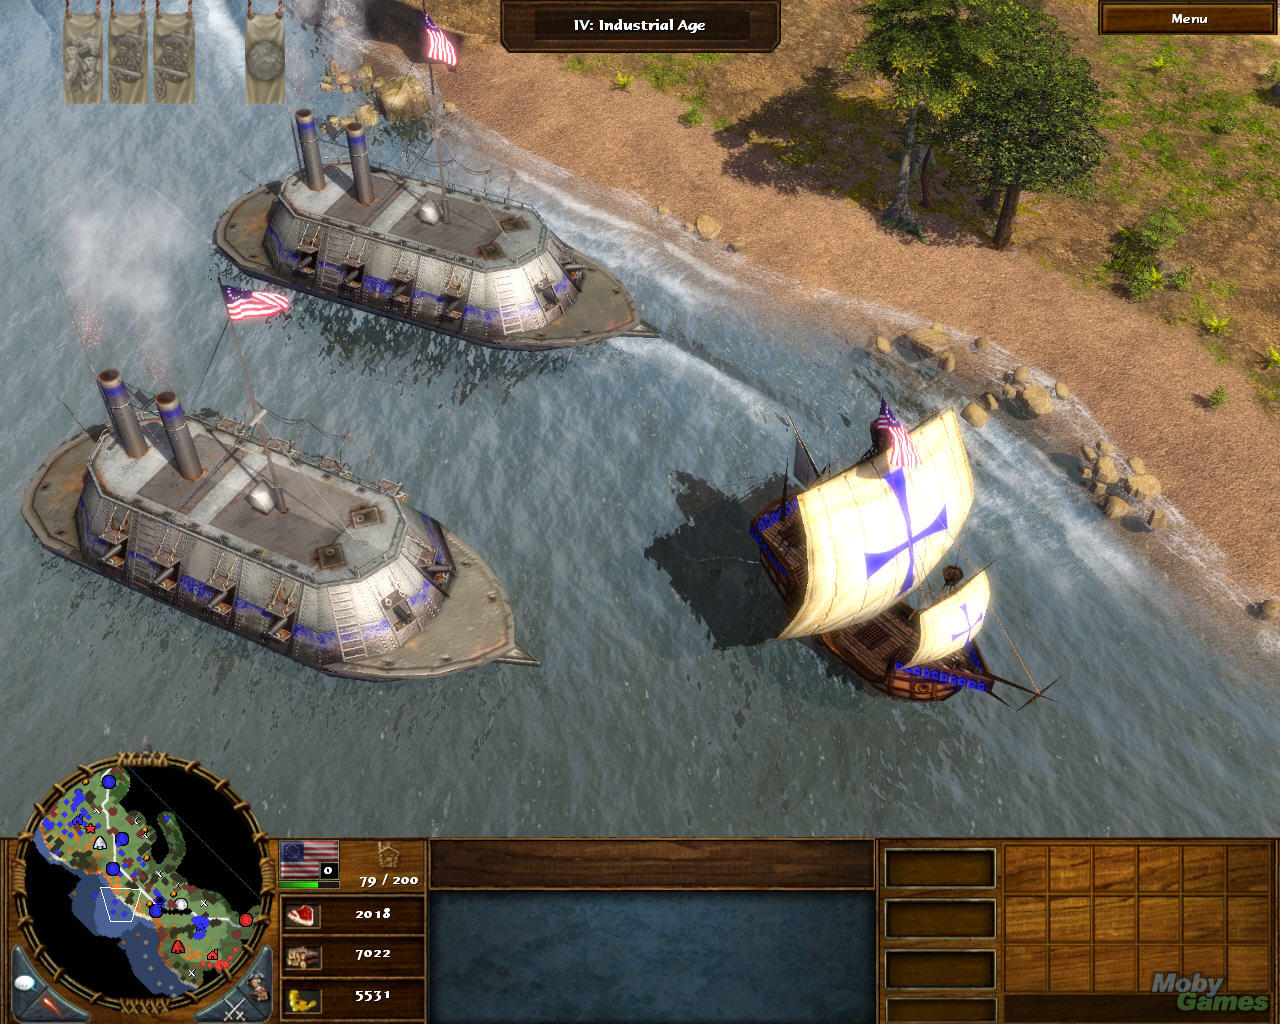 Age of water дата выхода. Age of Empires танки. Age of Empire 3 самолеты. Age of Empires 3. Age of Empires III the Warchiefs.